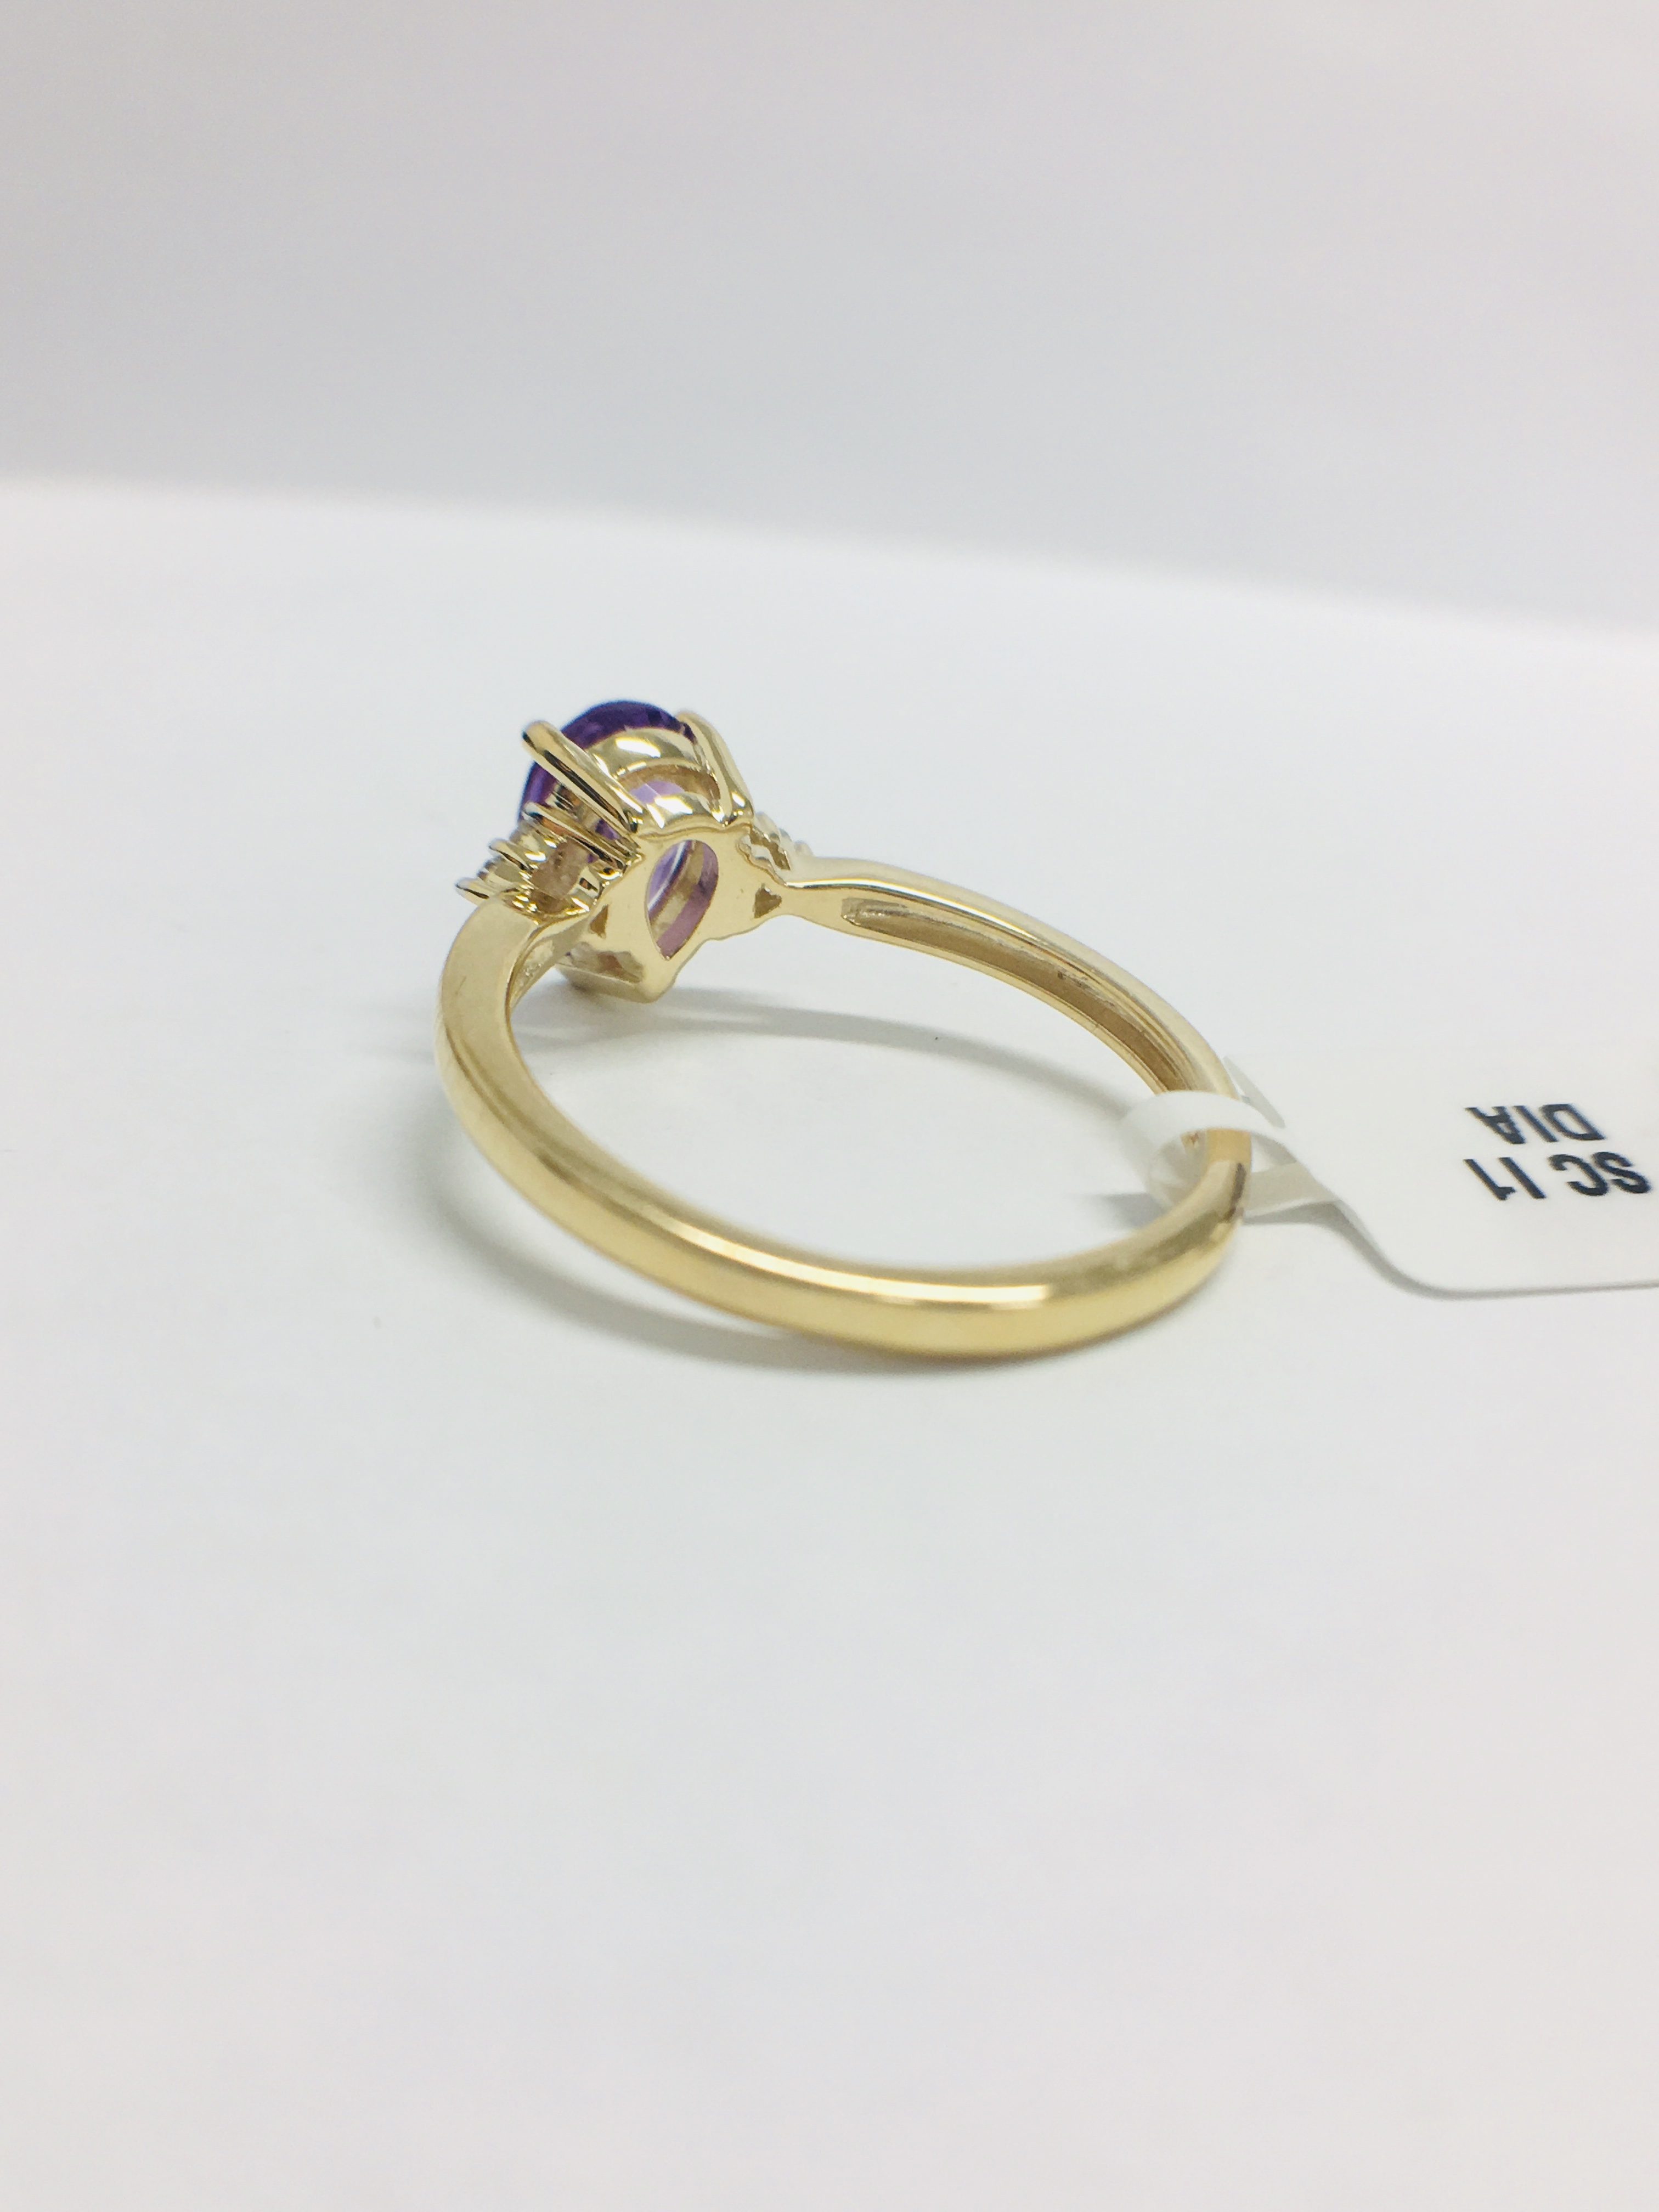 9Ct Yellow Gold Amethyst Diamond Navette Style Dress Ring, - Image 4 of 10